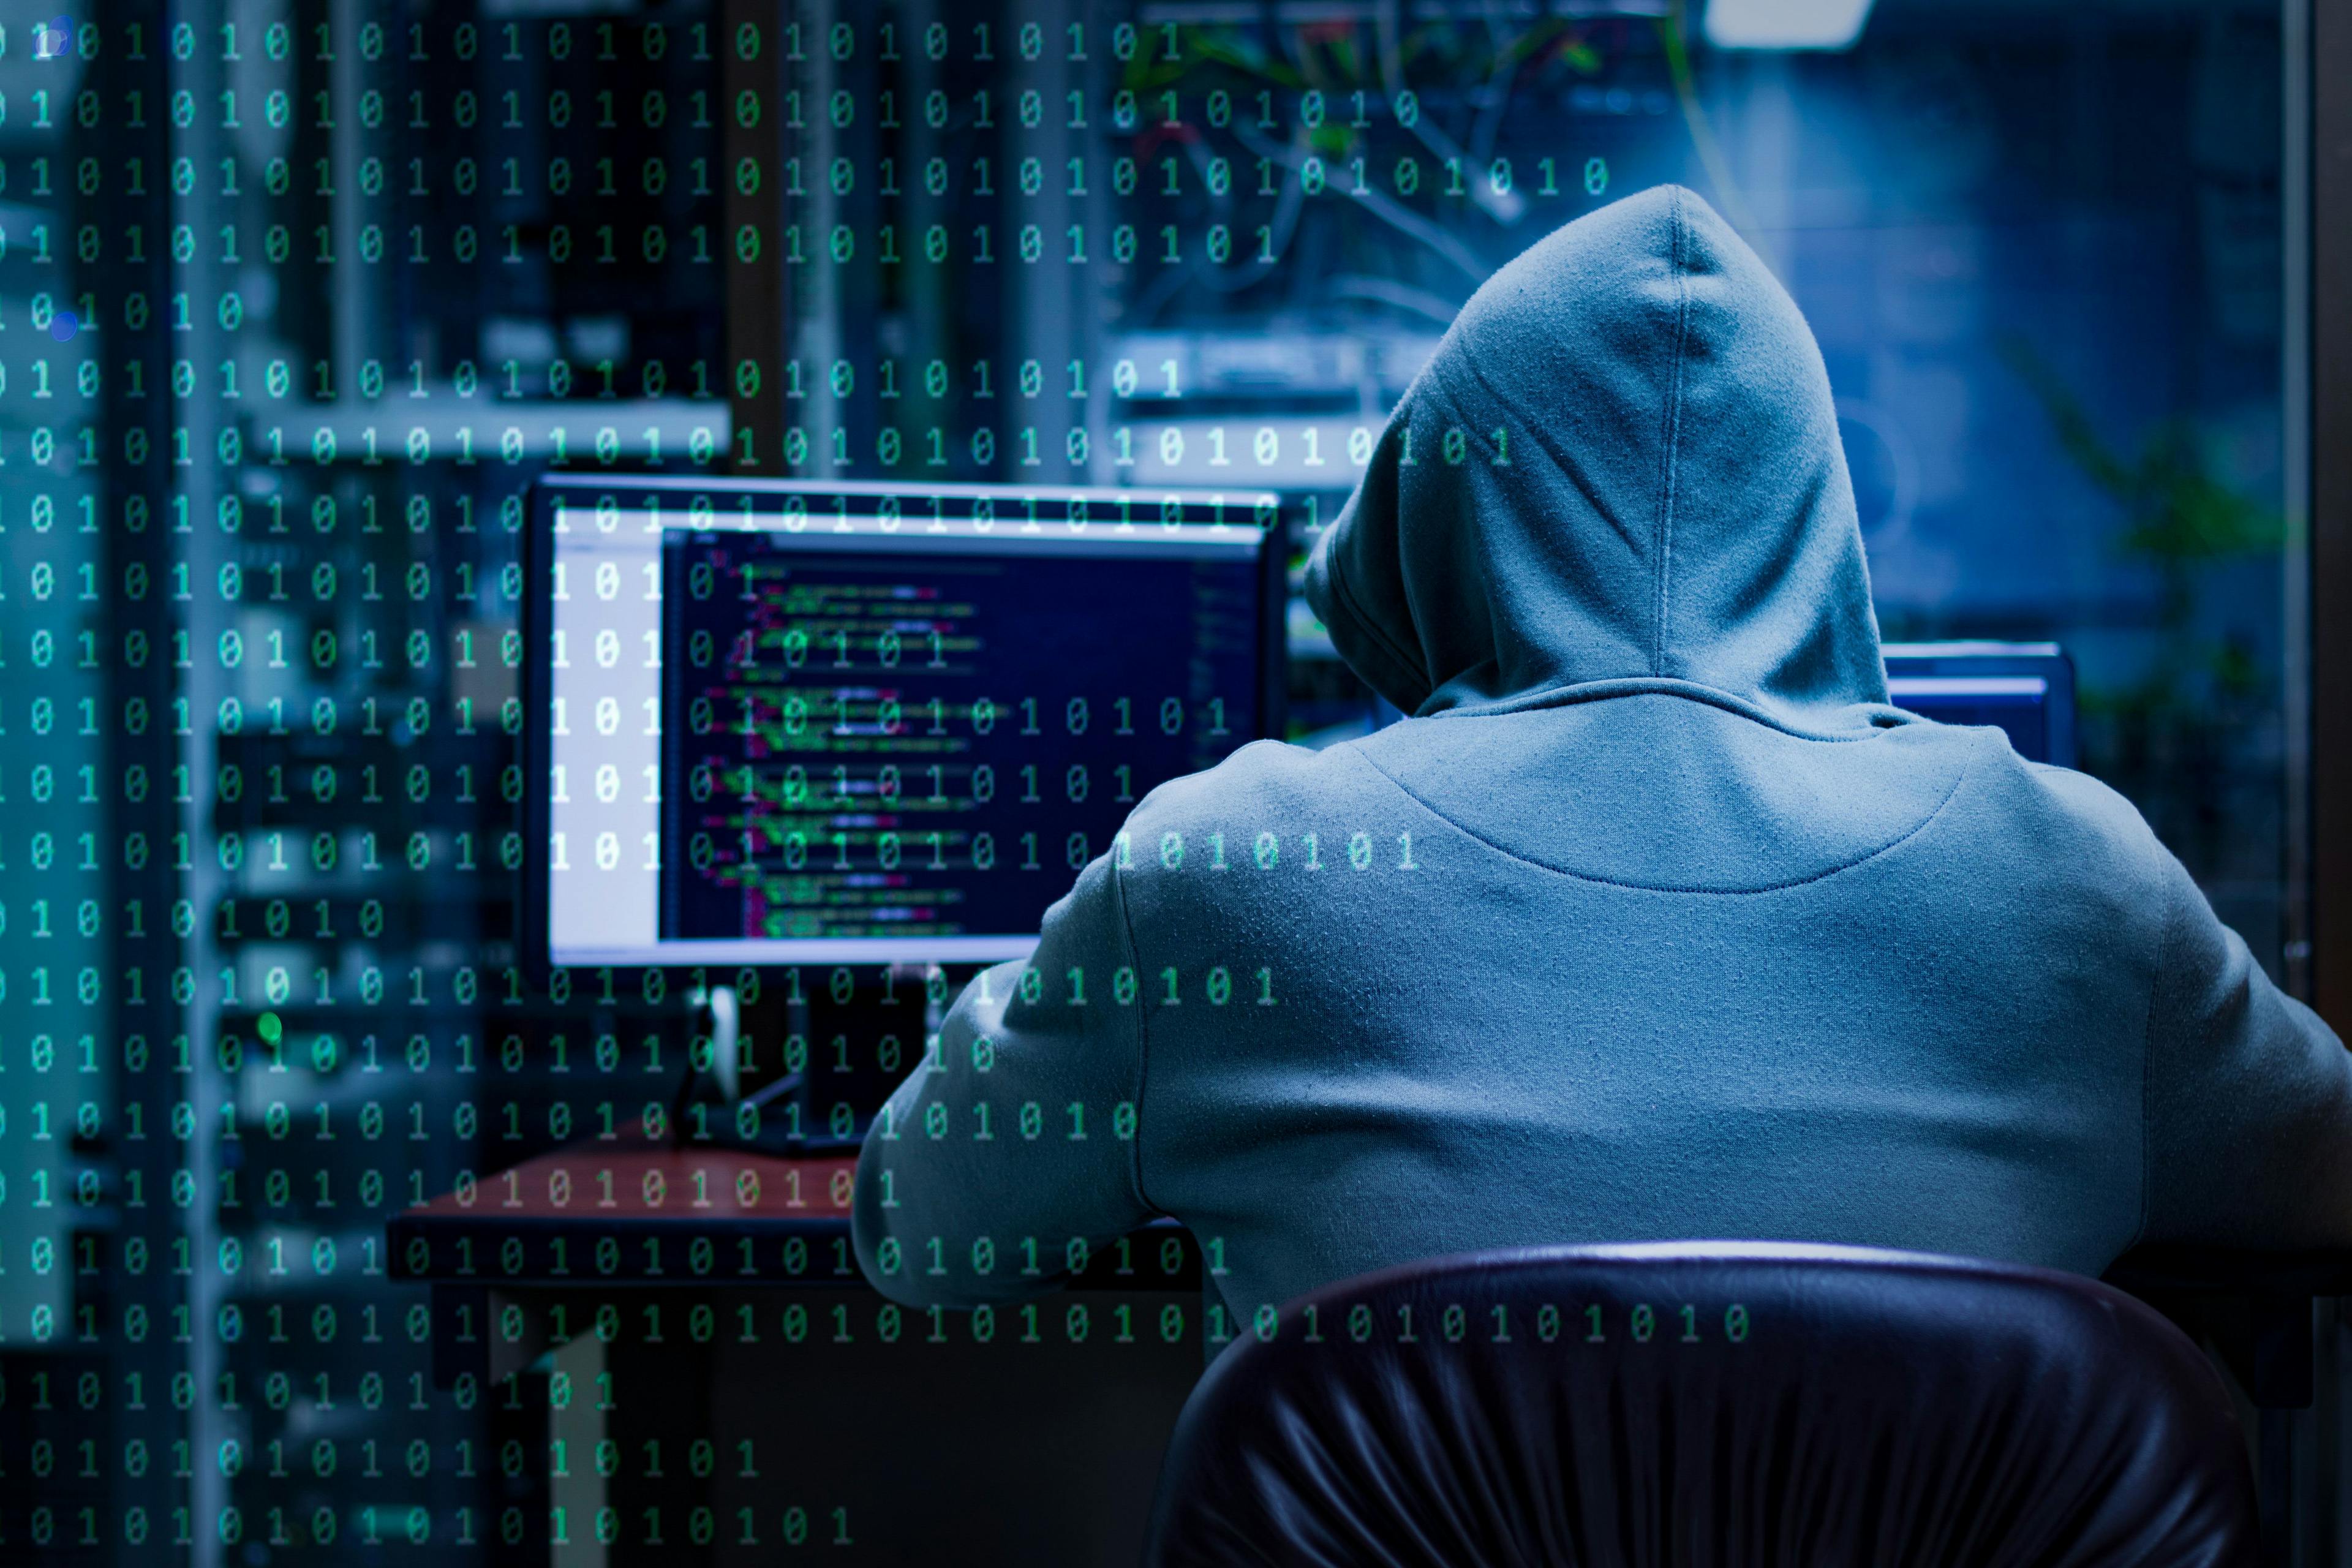 A person in a hoodie types at a computer in a dark room.